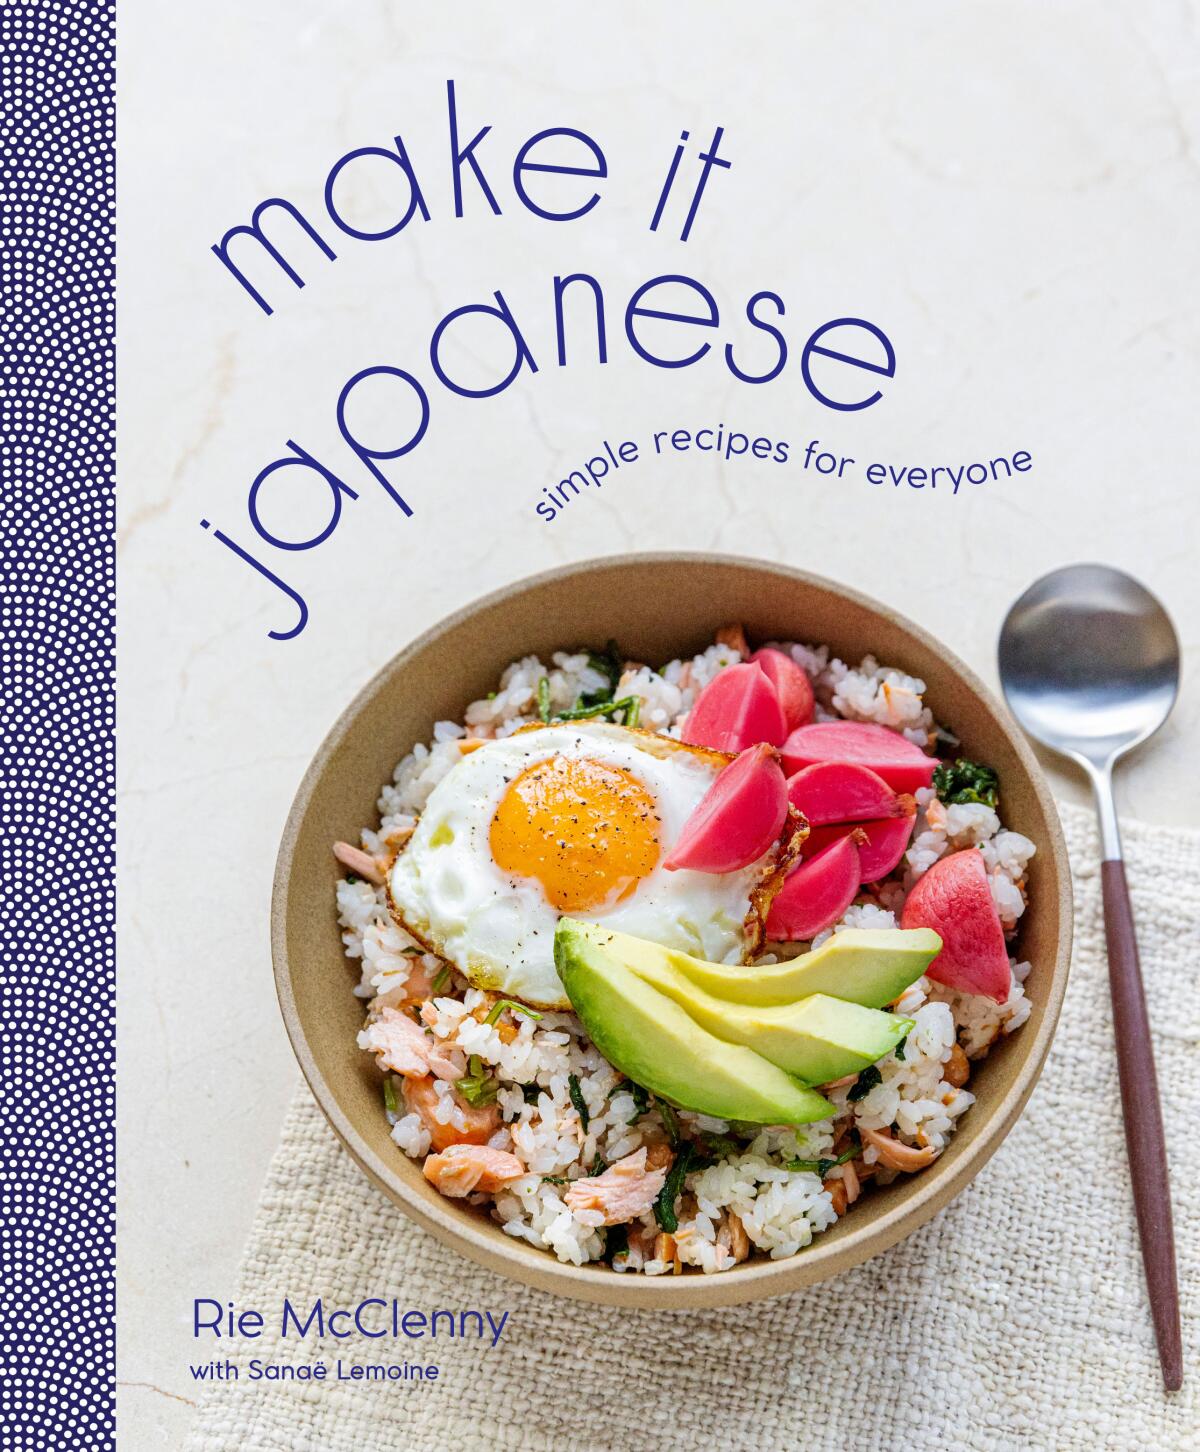 The cover of "Make It Japanese: Simple Recipes for Everyone," by Rie McClenny with Sonae Lemoine.